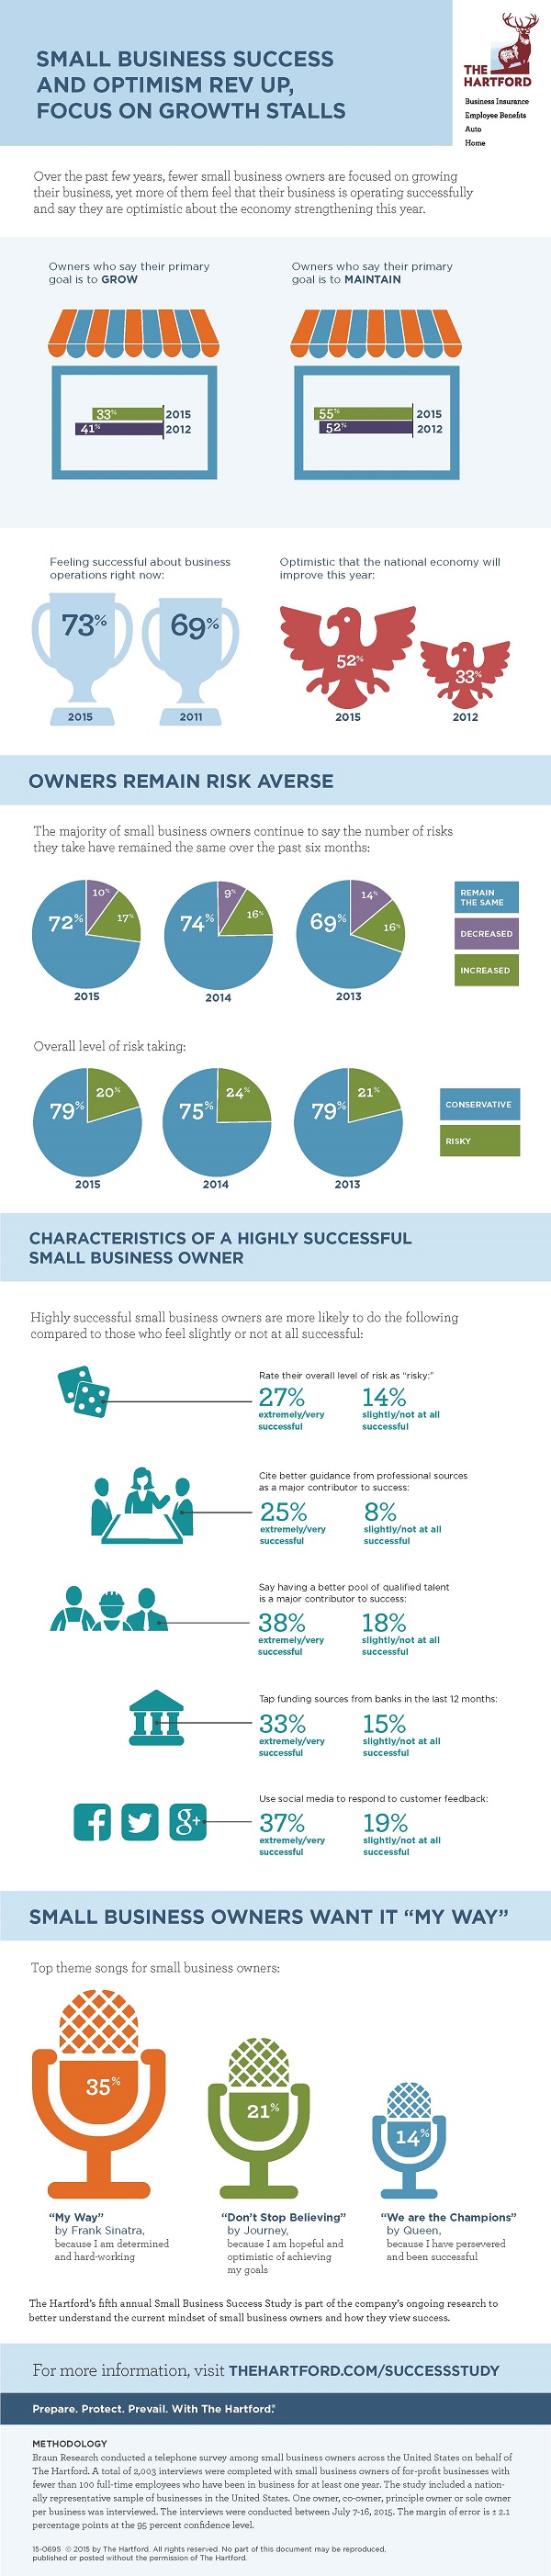 small-business-success-2015